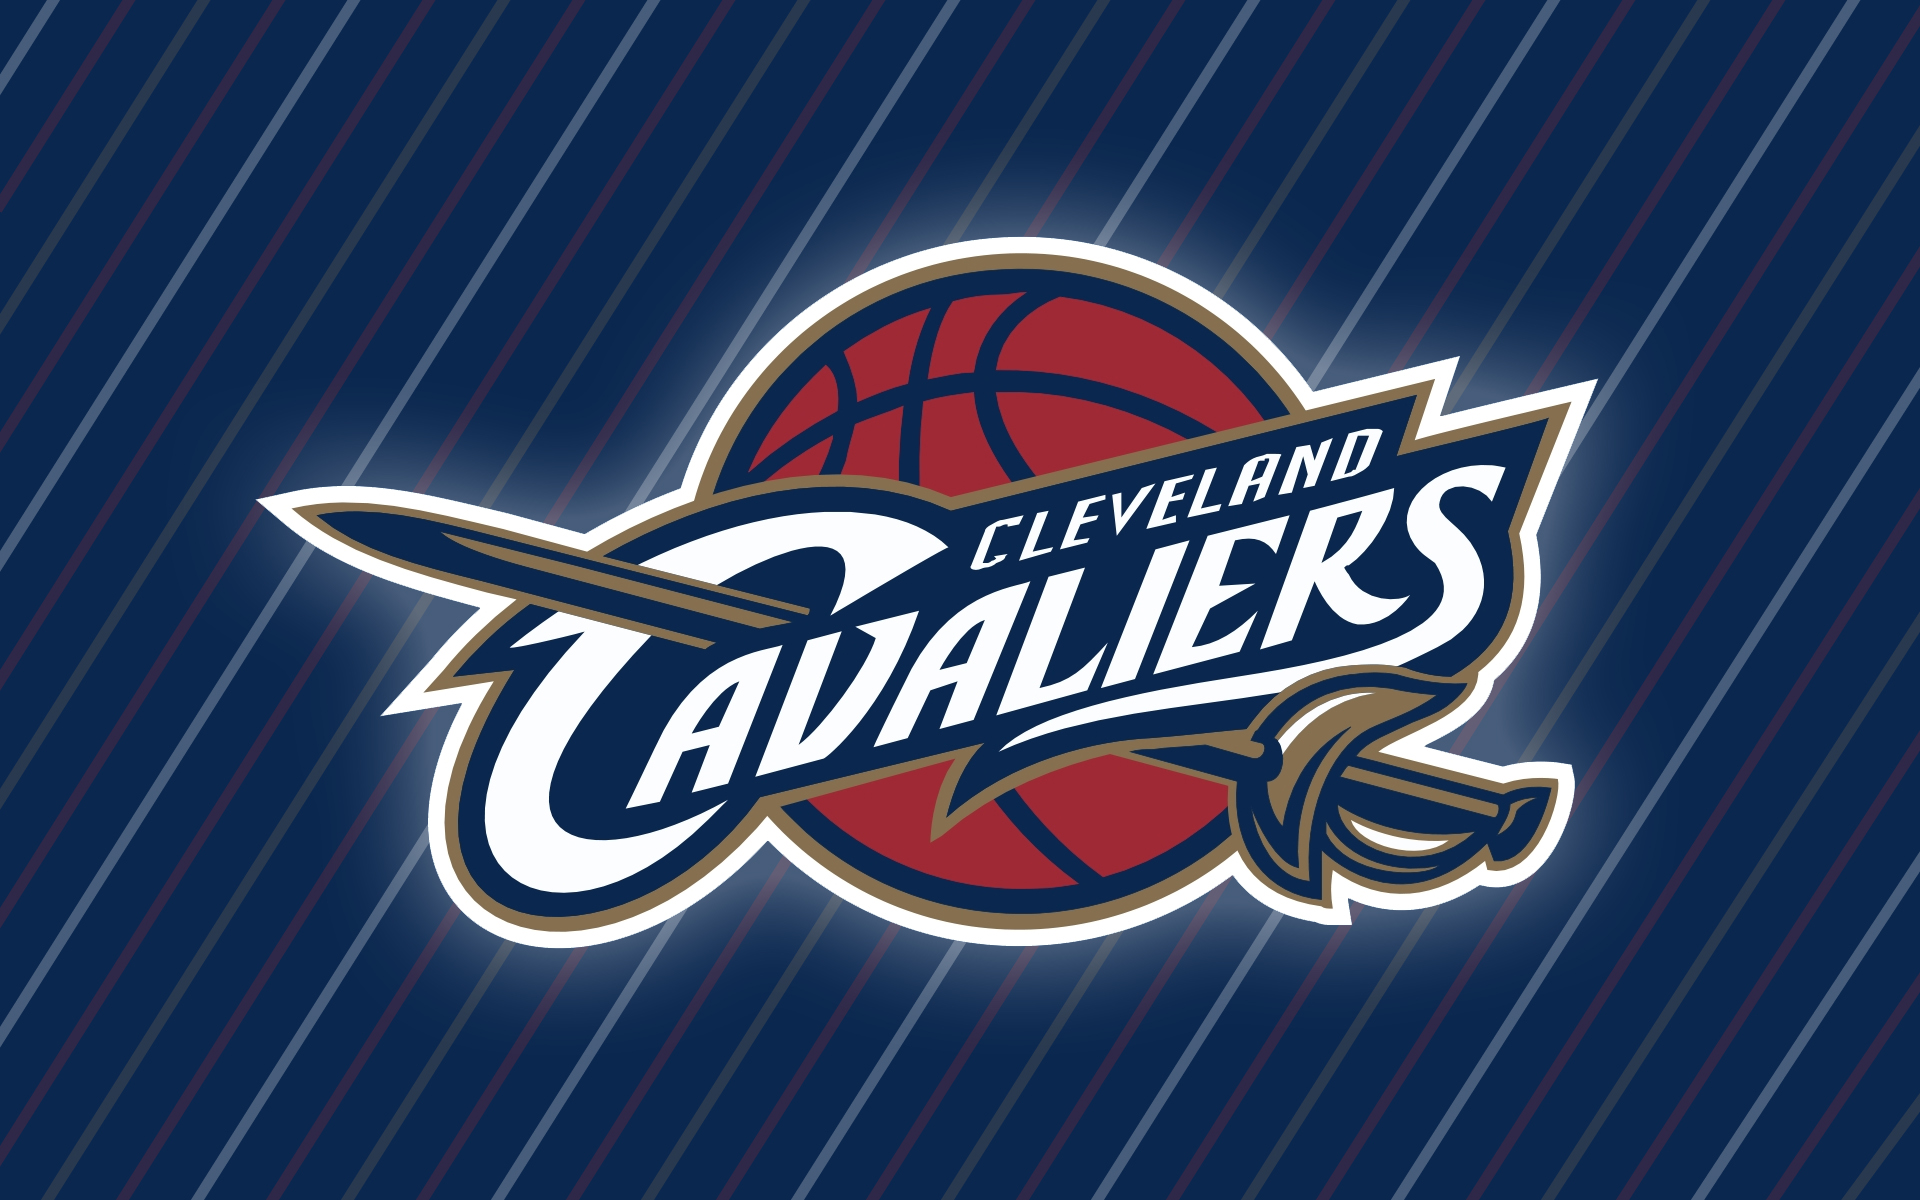 Cleveland Cavaliers Wallpaper High Quality O72 Px Kb